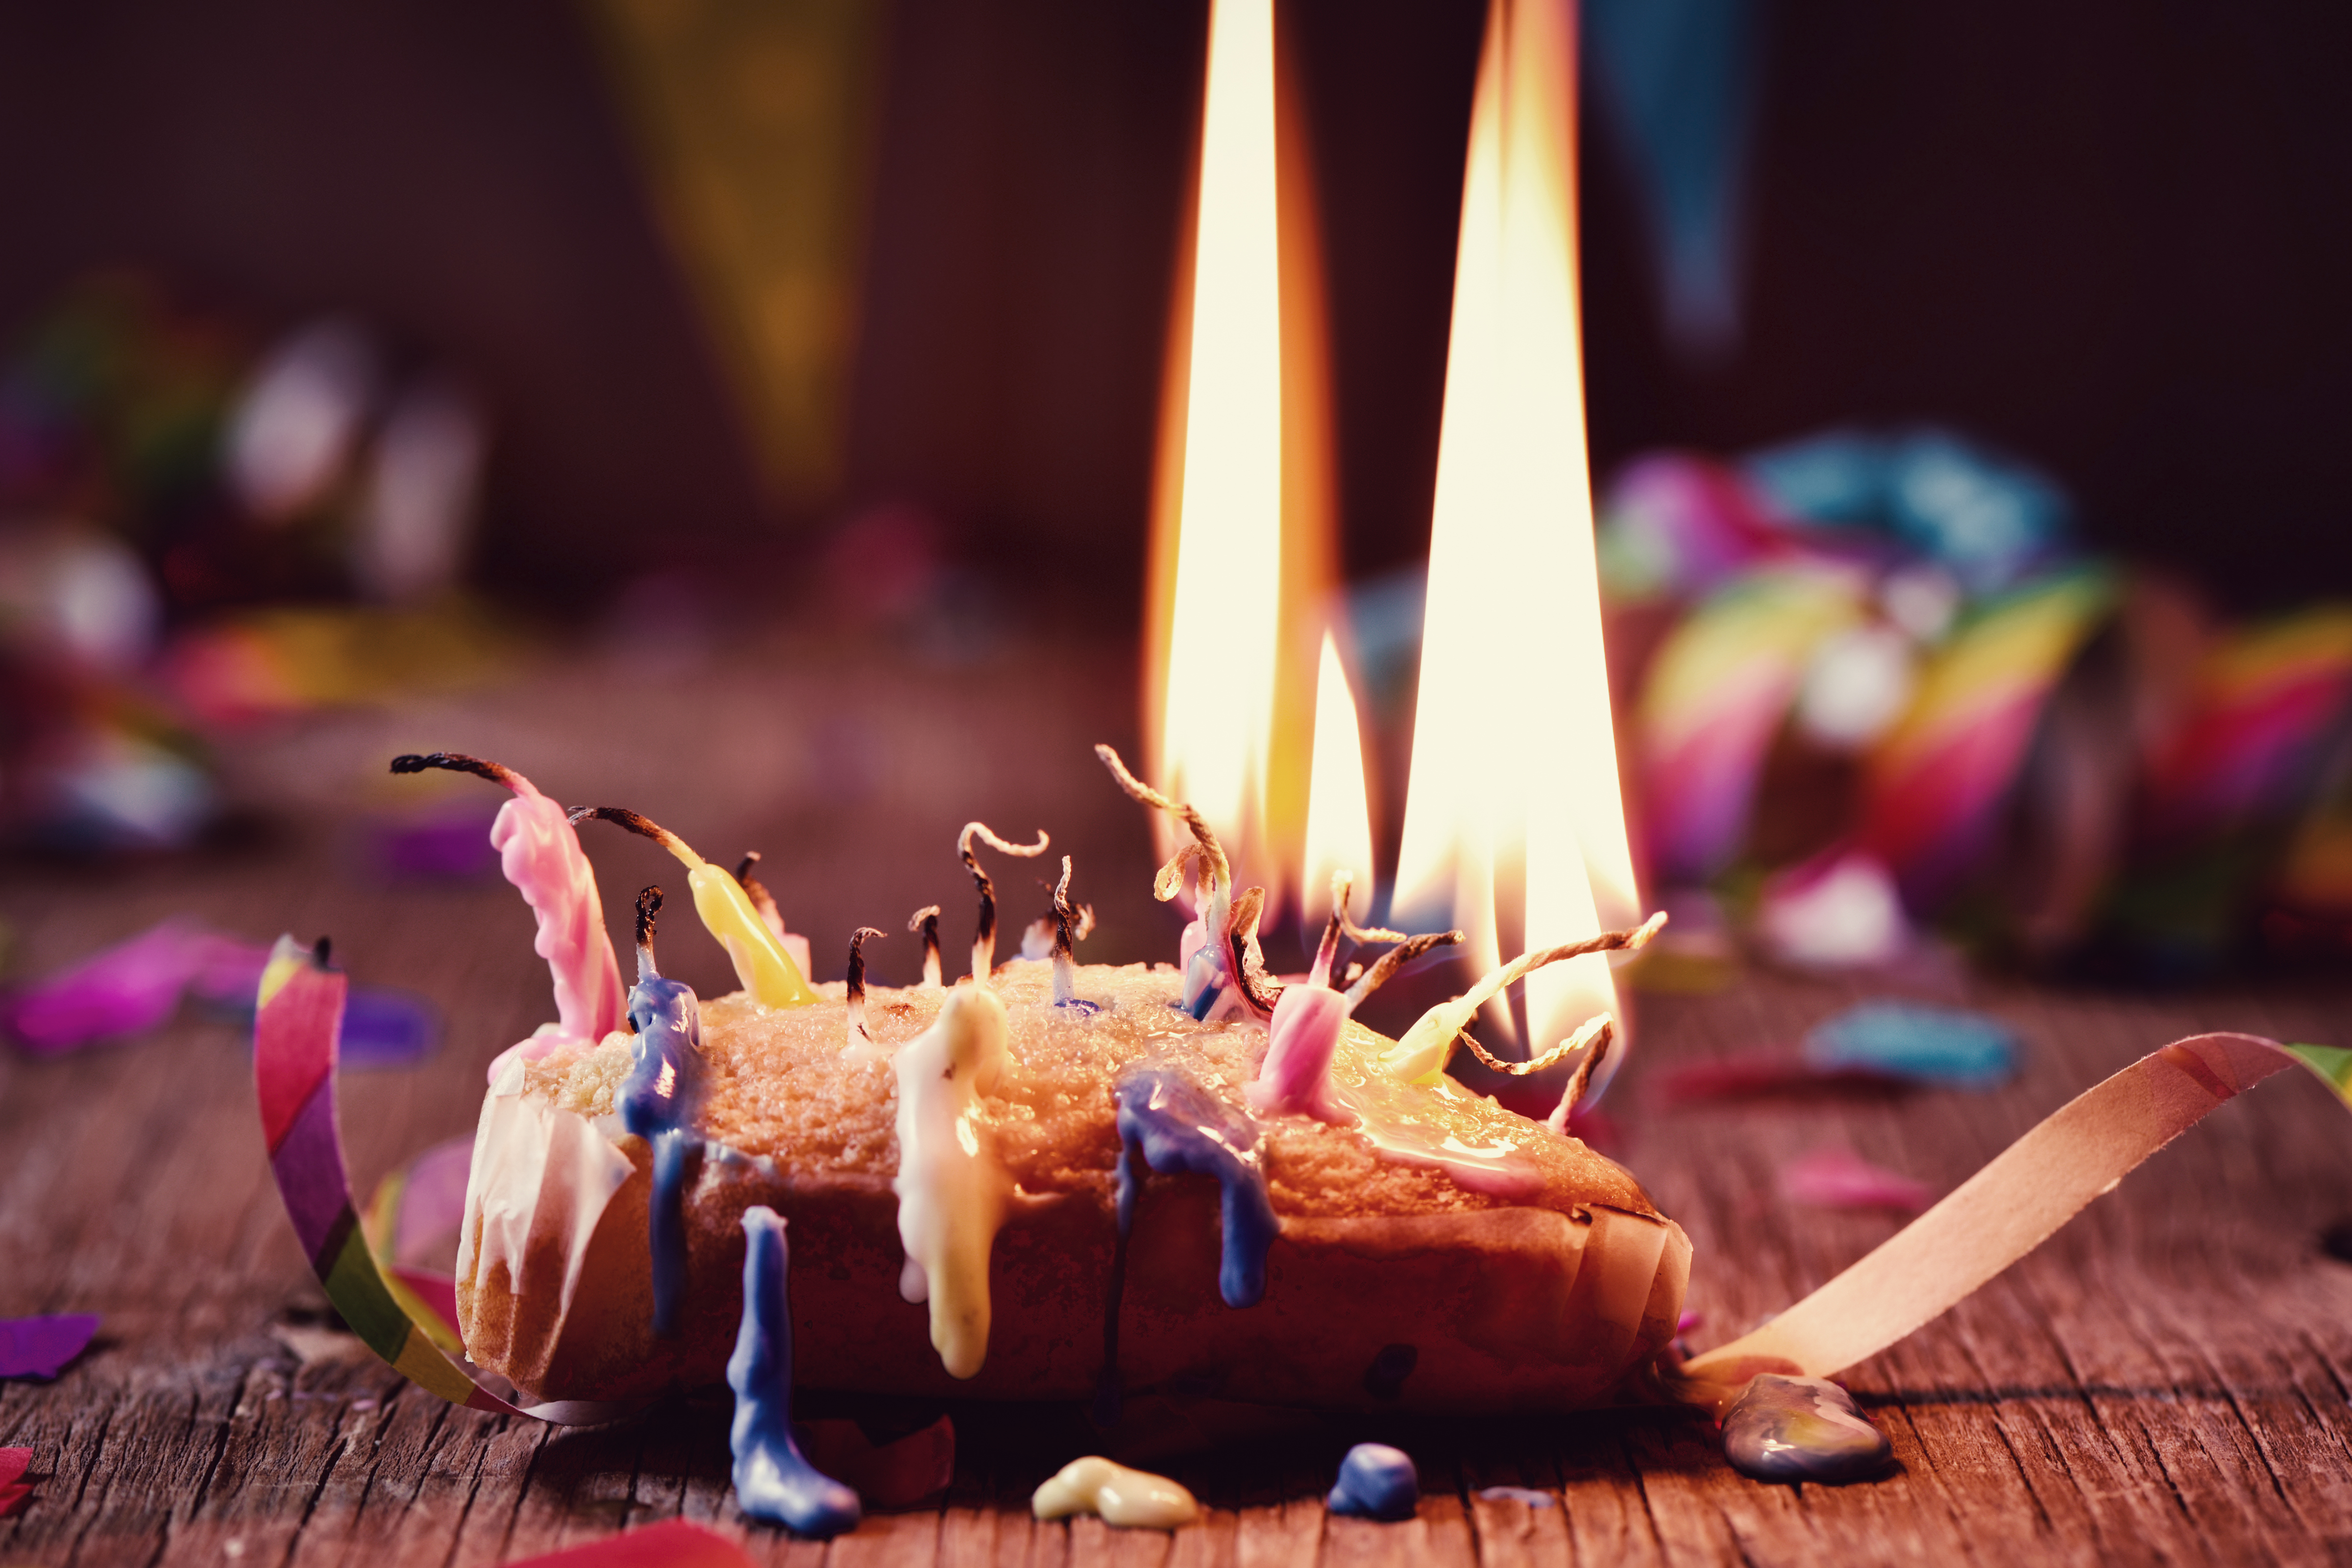 https://depositphotos.com/161225574/stock-photo-blowing-out-the-candles-of.html